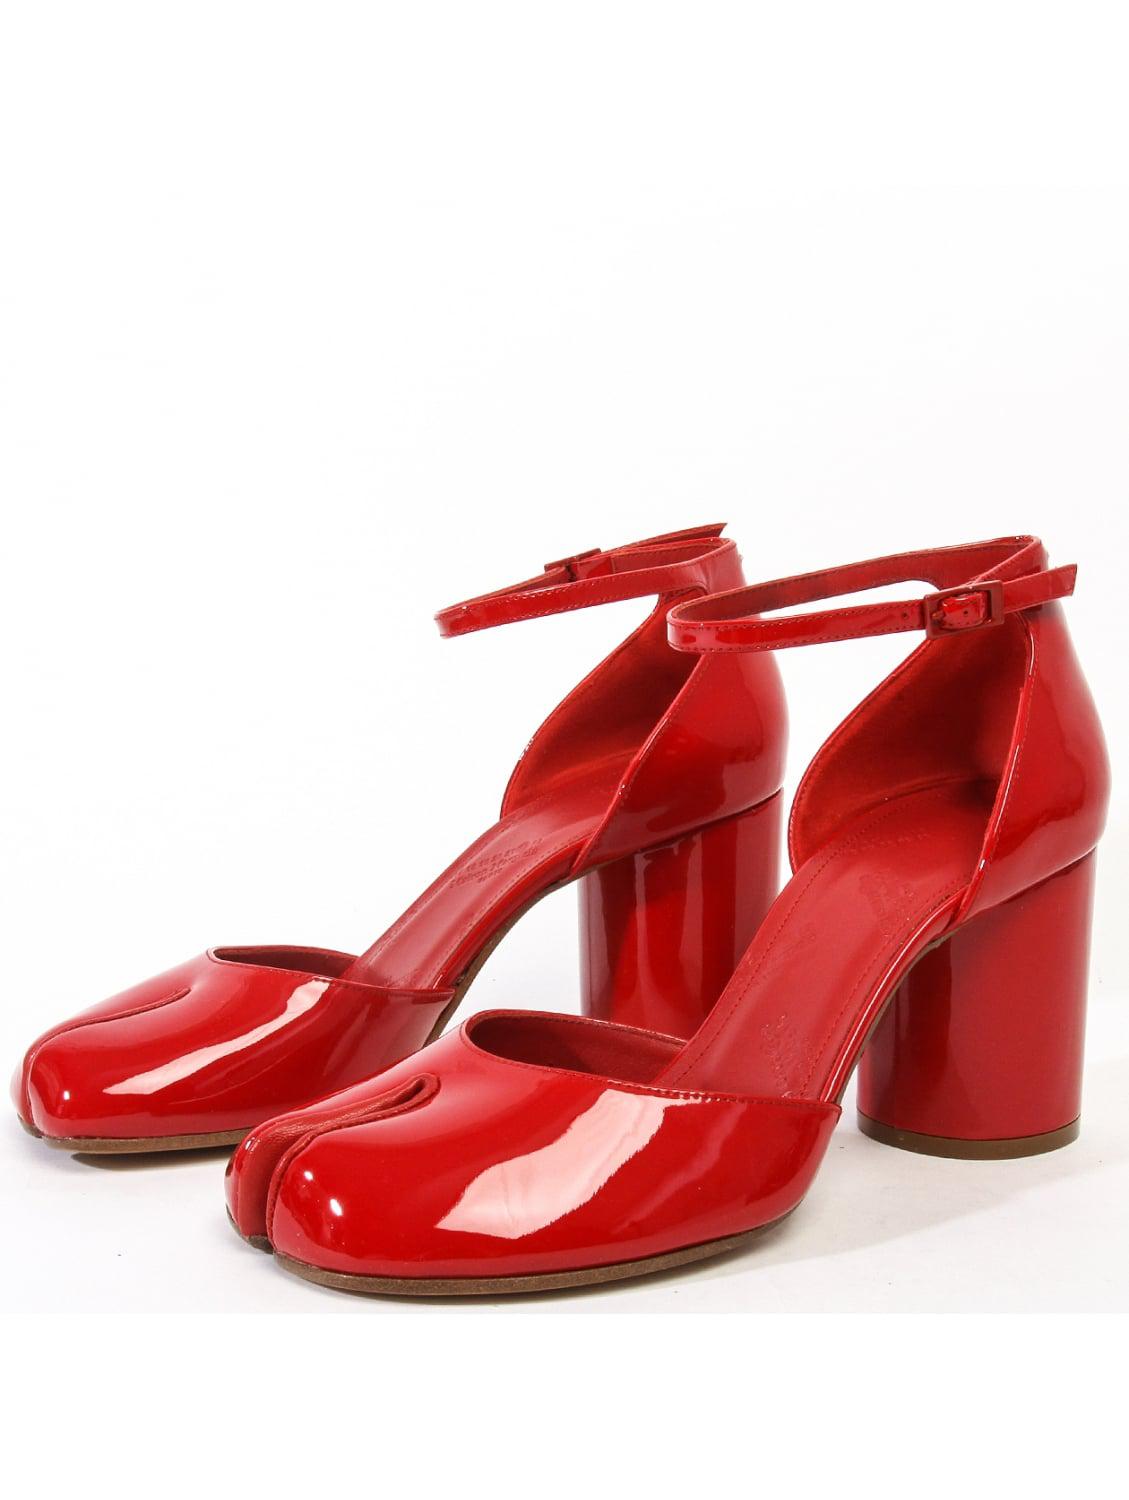 Maison Margiela Patent Leather Tabi Pumps in Red - Lyst